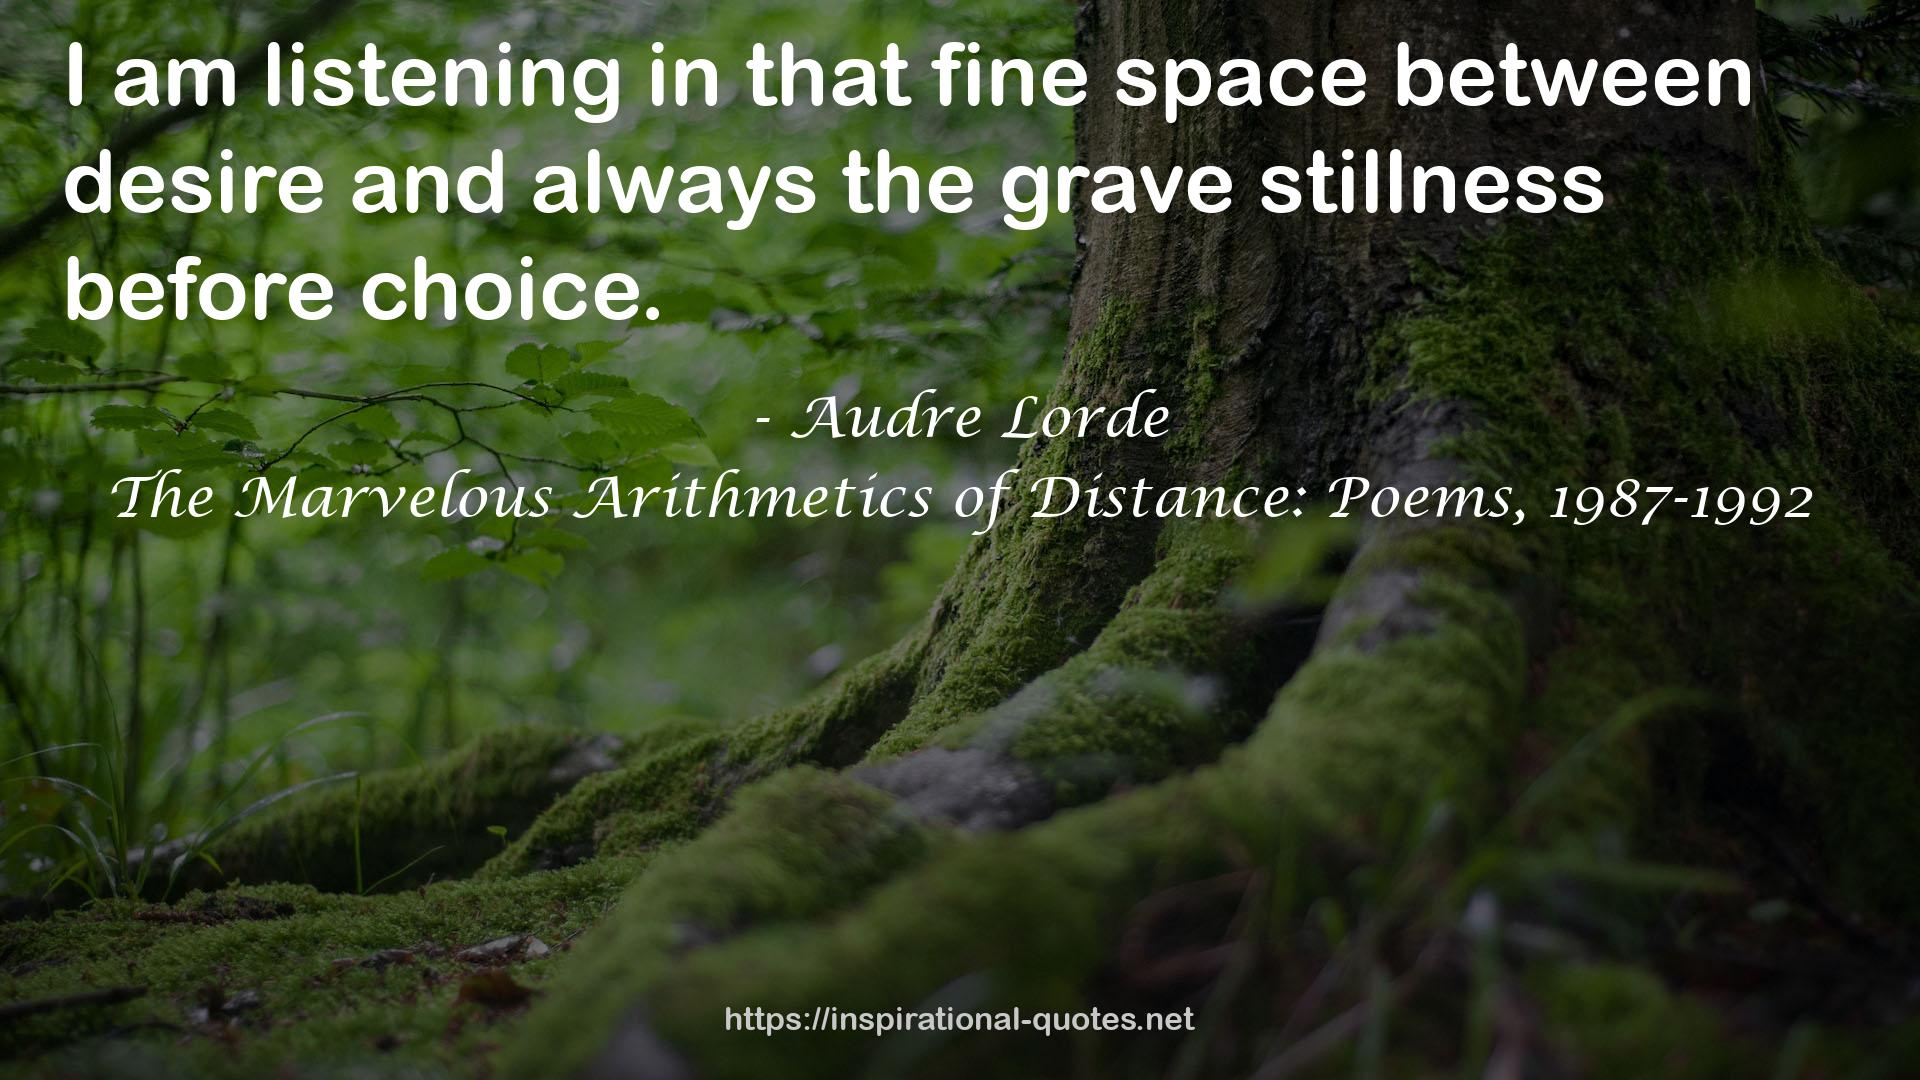 The Marvelous Arithmetics of Distance: Poems, 1987-1992 QUOTES